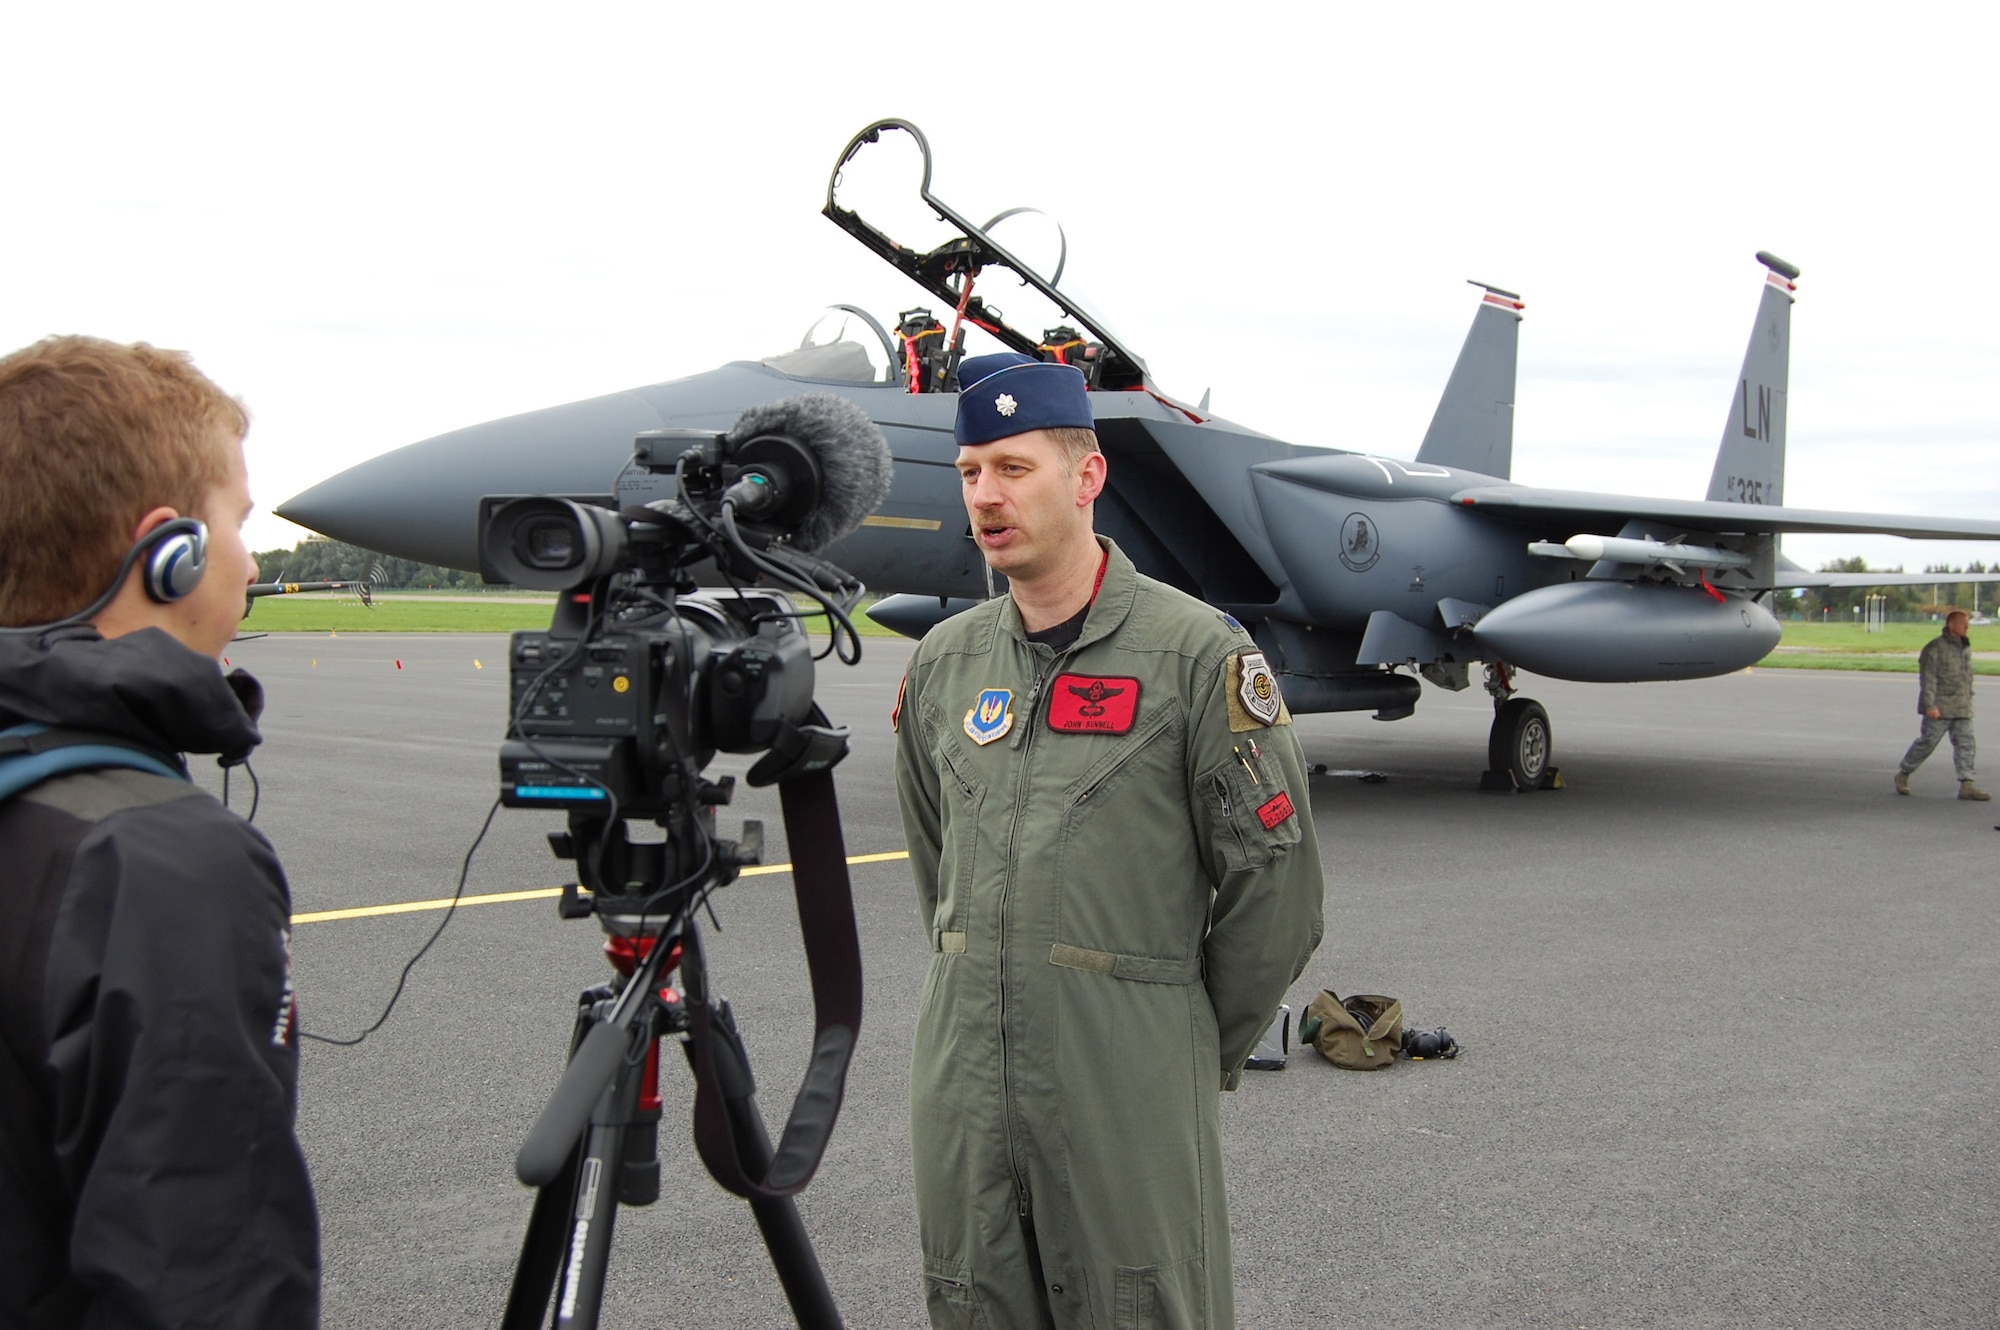 Lt. Col. John “Bugs” Bunnell, 494th Fighter Squadron commander, is interviewed by NATO Television reporter David Heathfield, at the airport in Tallinn, Estonia Monday.  Lieutenant Colonel Bunnell, had just landed his F-15 Strike Eagle after completing day one of NATO’s Baltic Region Training Event IV Alpha. (U.S. Air Force Photo by Master Sgt. Gino Mattorano)